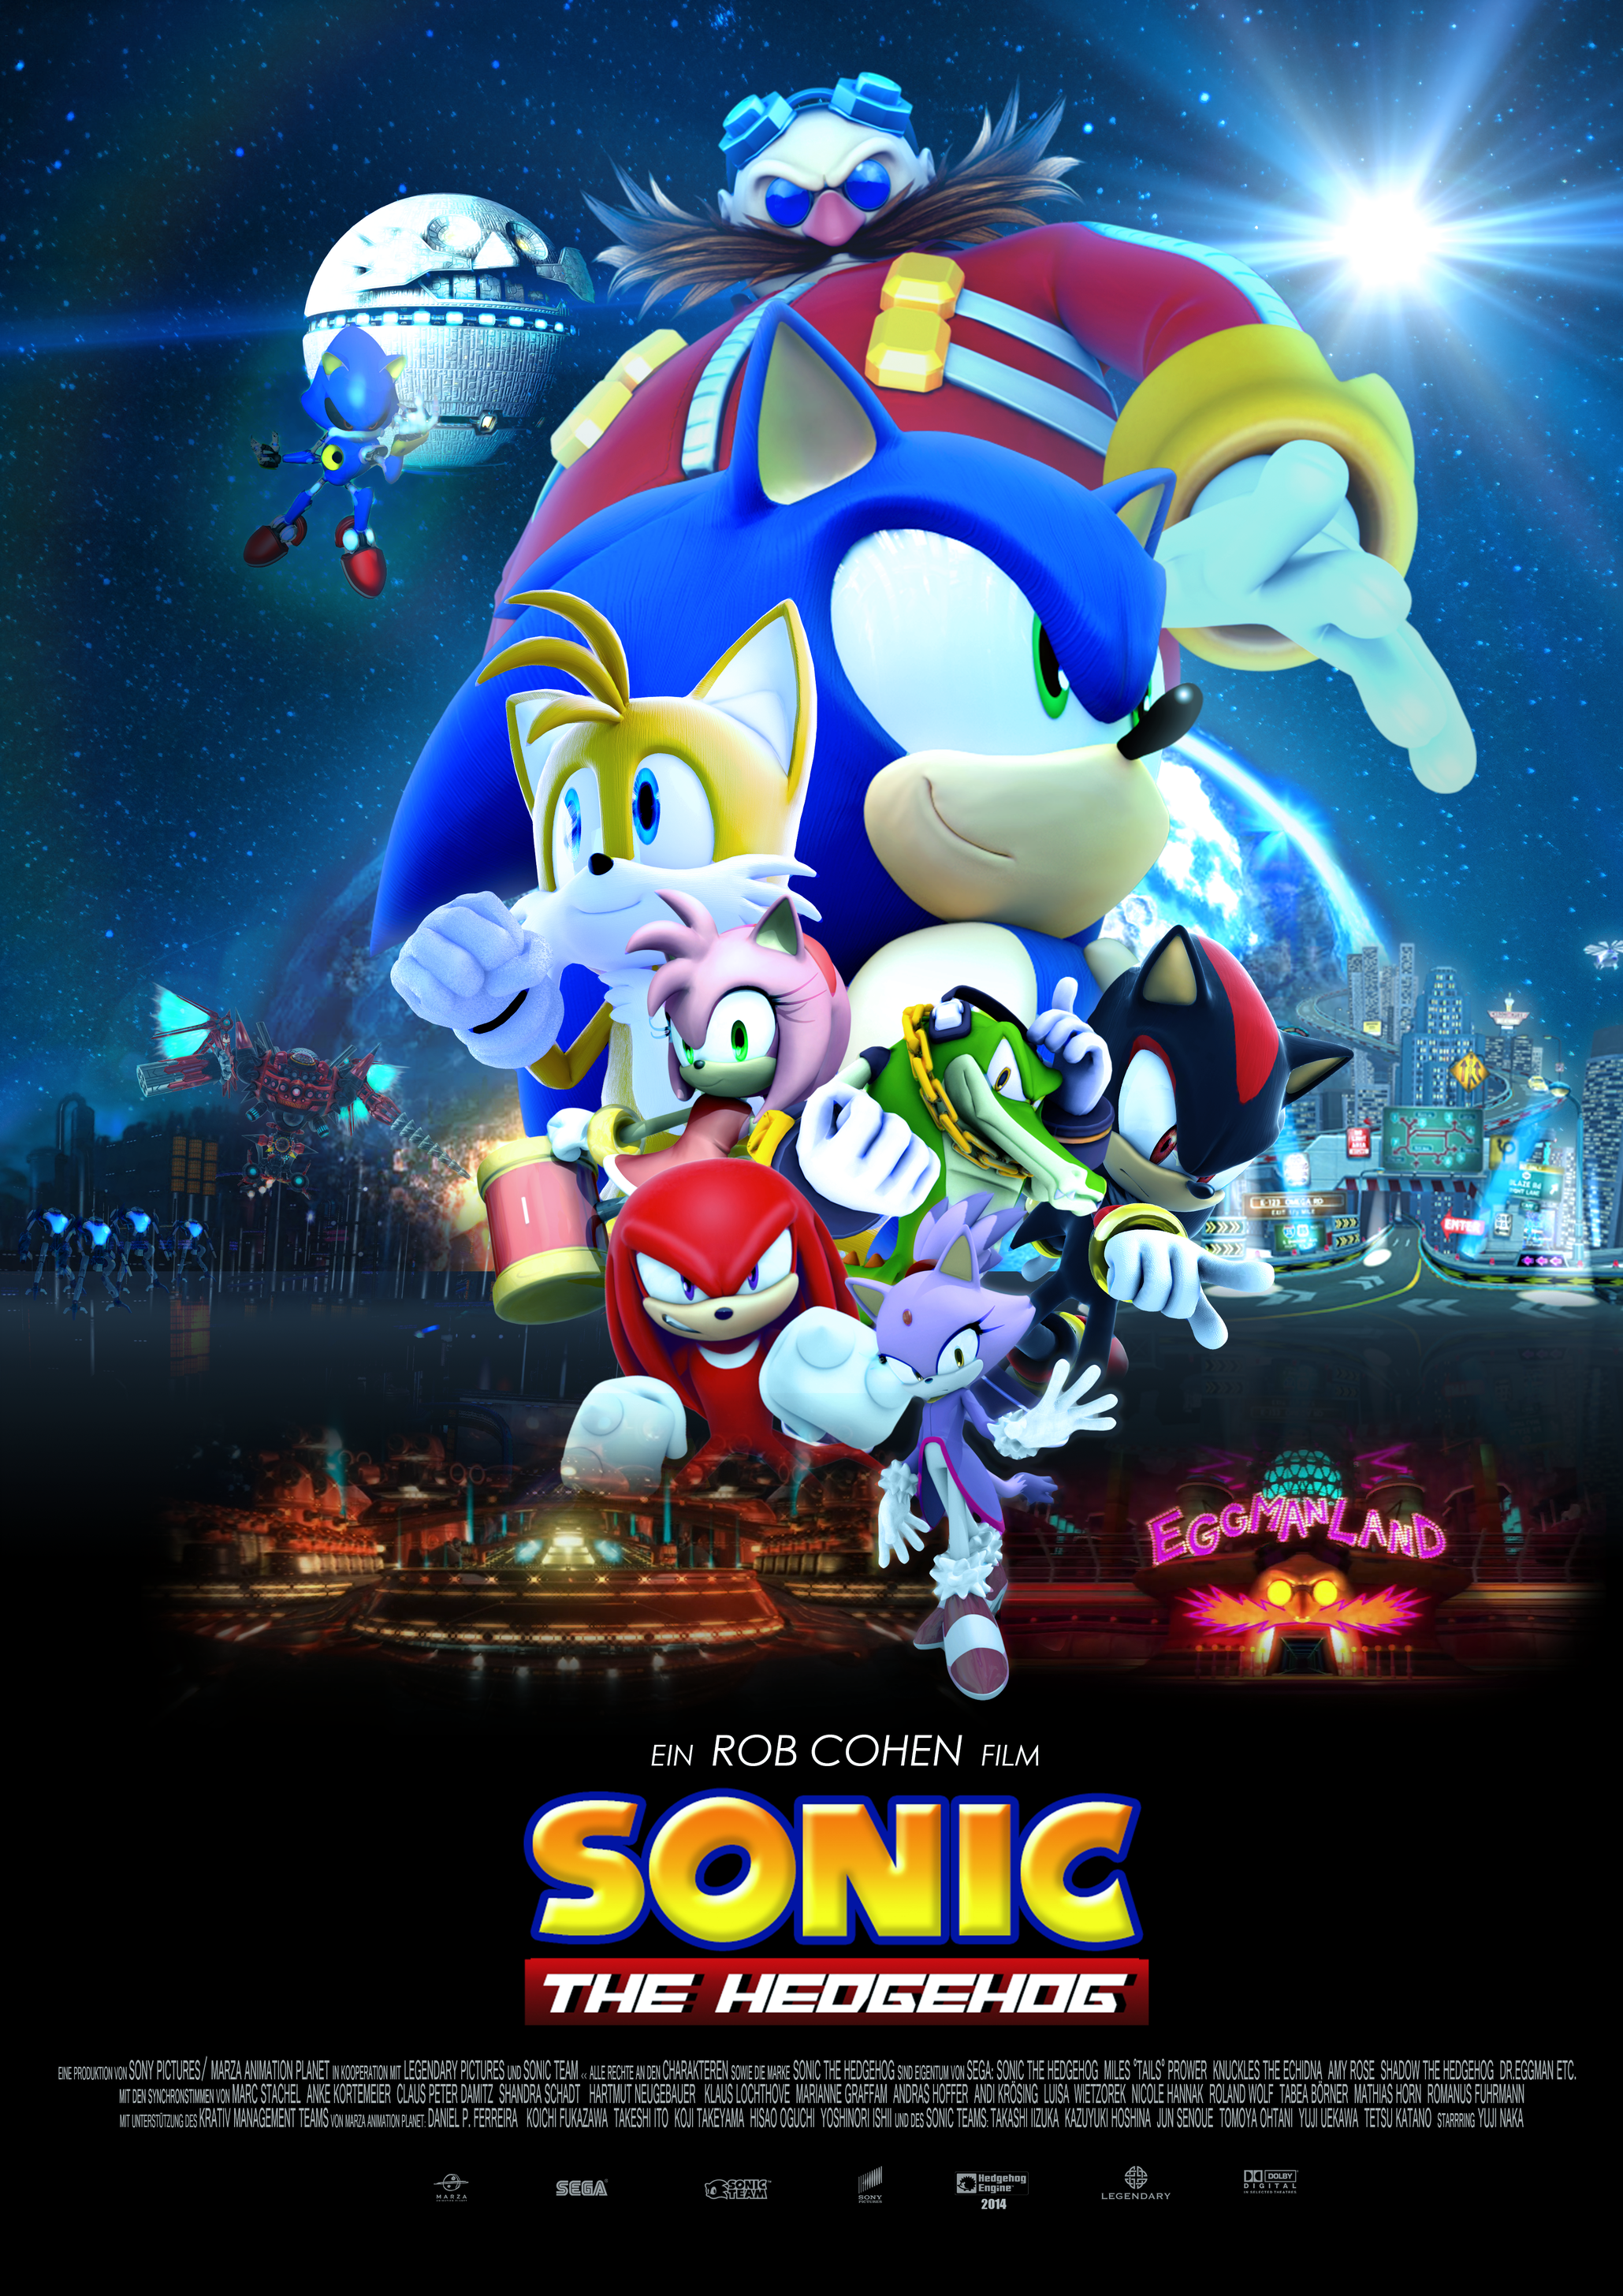 Sonic the Hedgehog Movie - Poster by RealSonicSpeed on DeviantArt